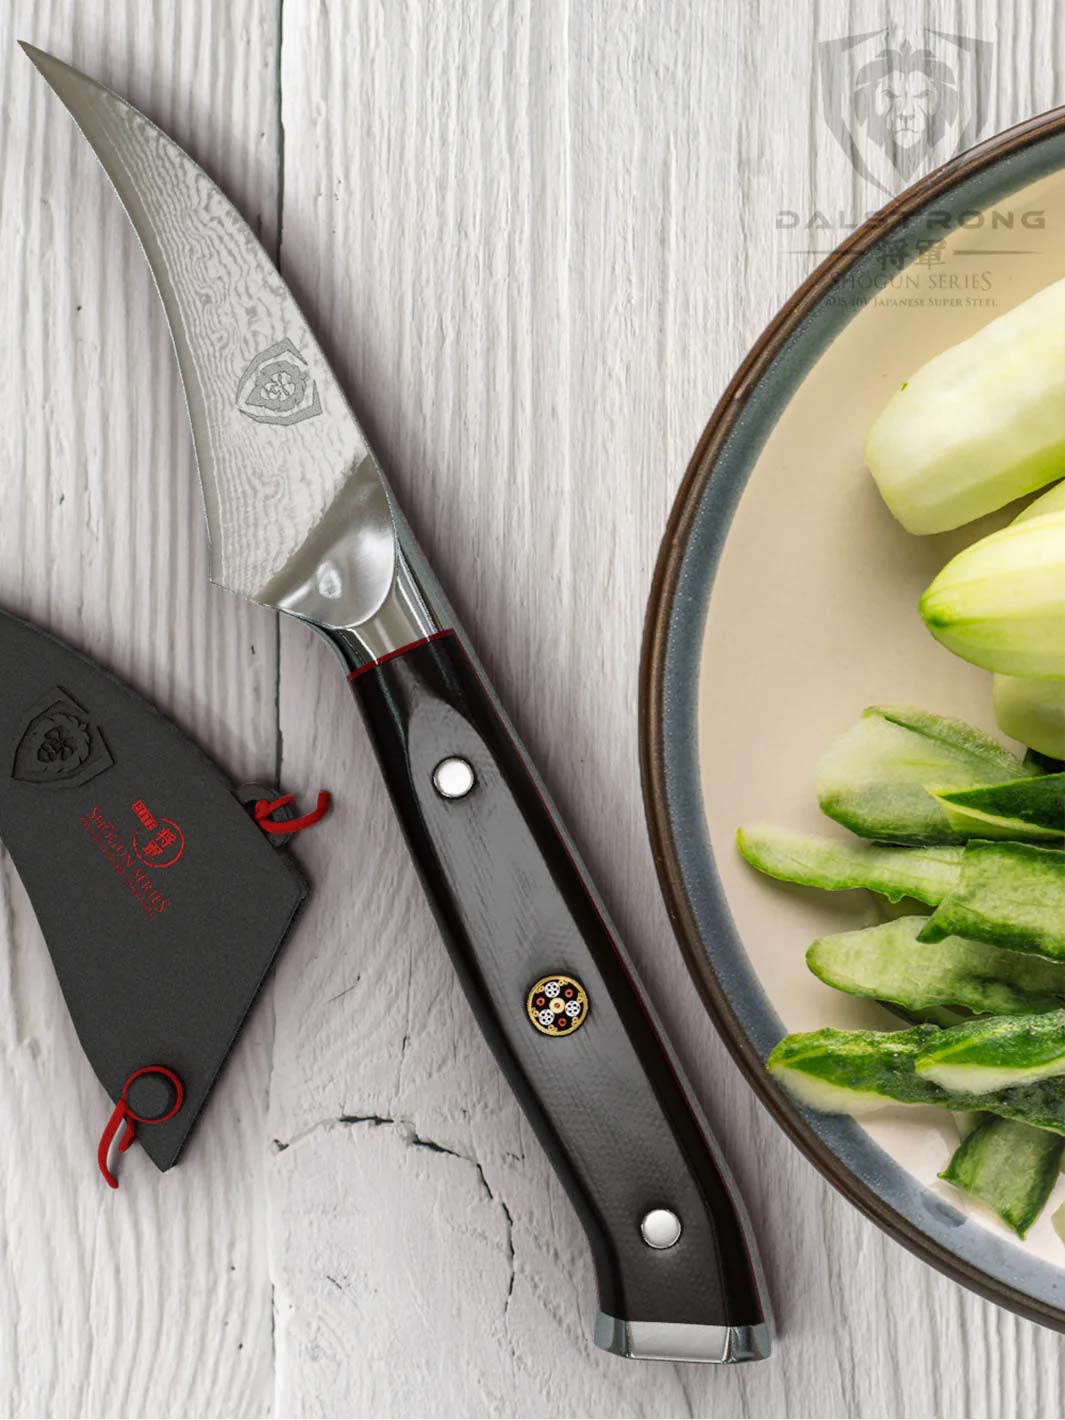 Dalstrong shogun series 3 inch bird beak paring knife with black handle a peeled cucumber on the side.